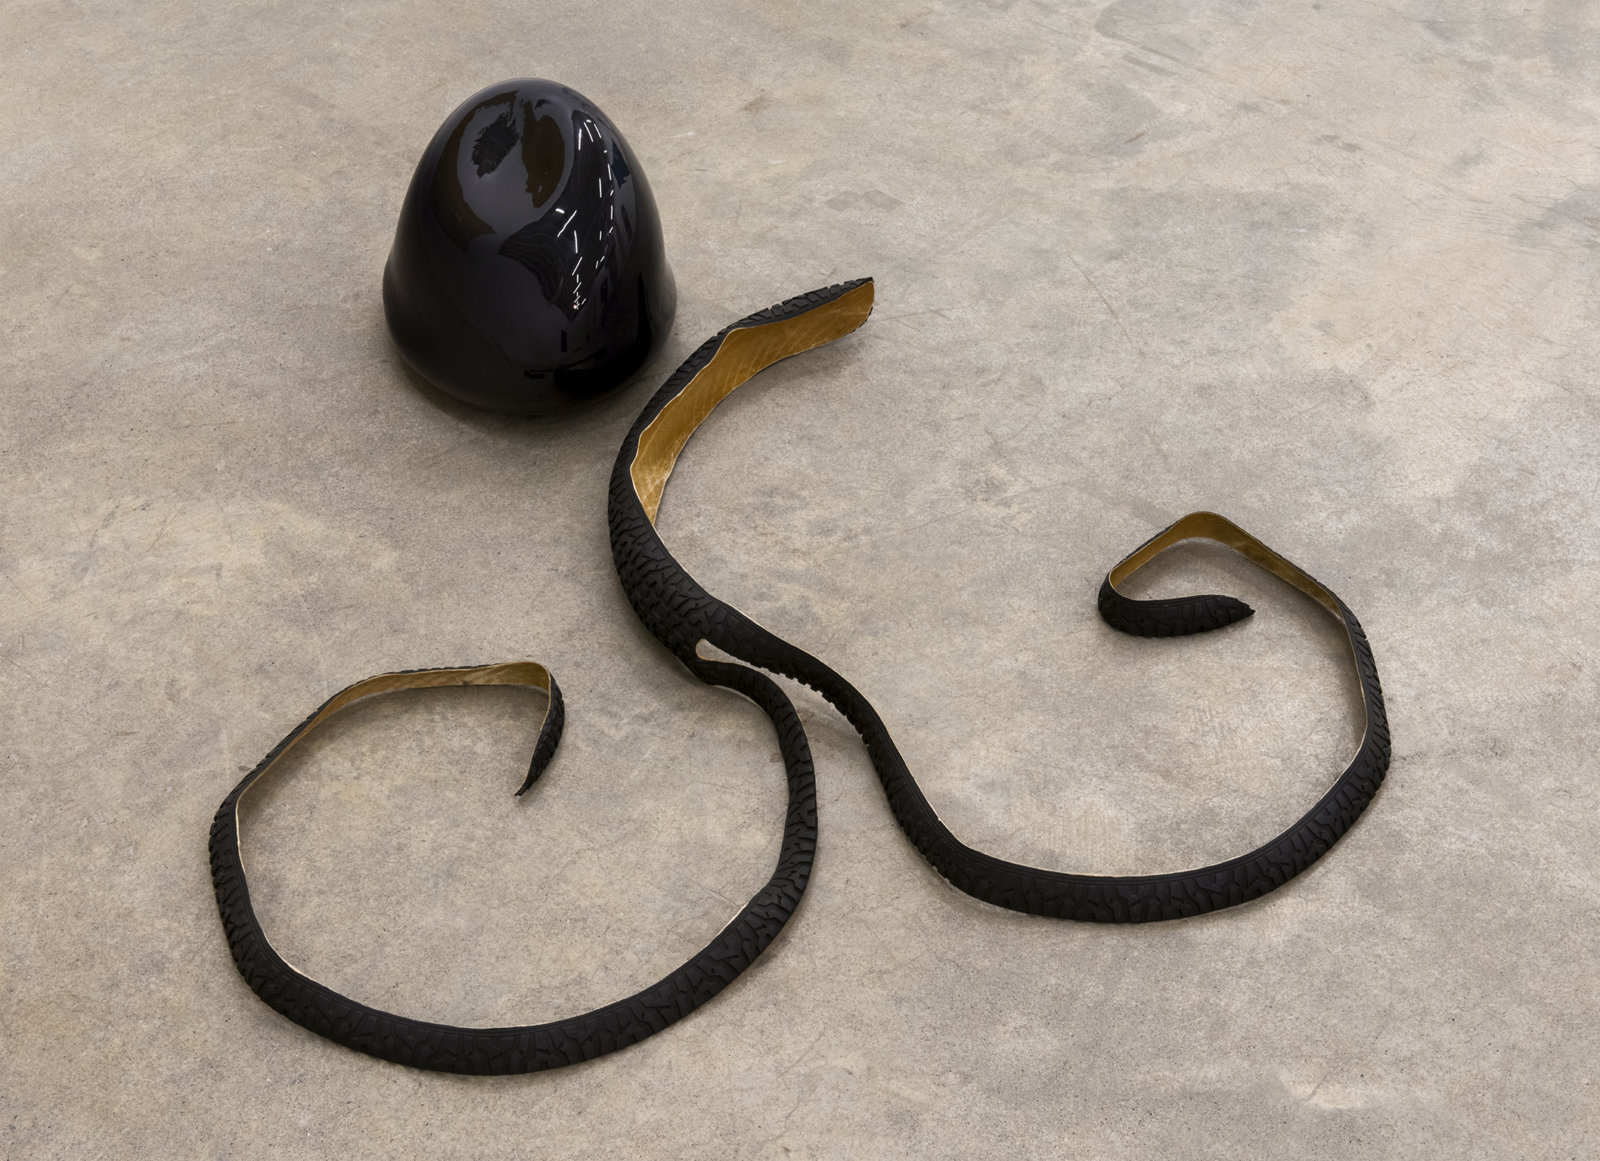 Jerry Pethick, Kolossus of Kindergarden (detail), 1987–1989, spectra-foil on records, aluminium, blown glass, wood, rock, tires, cargo blanket, dimensions variable